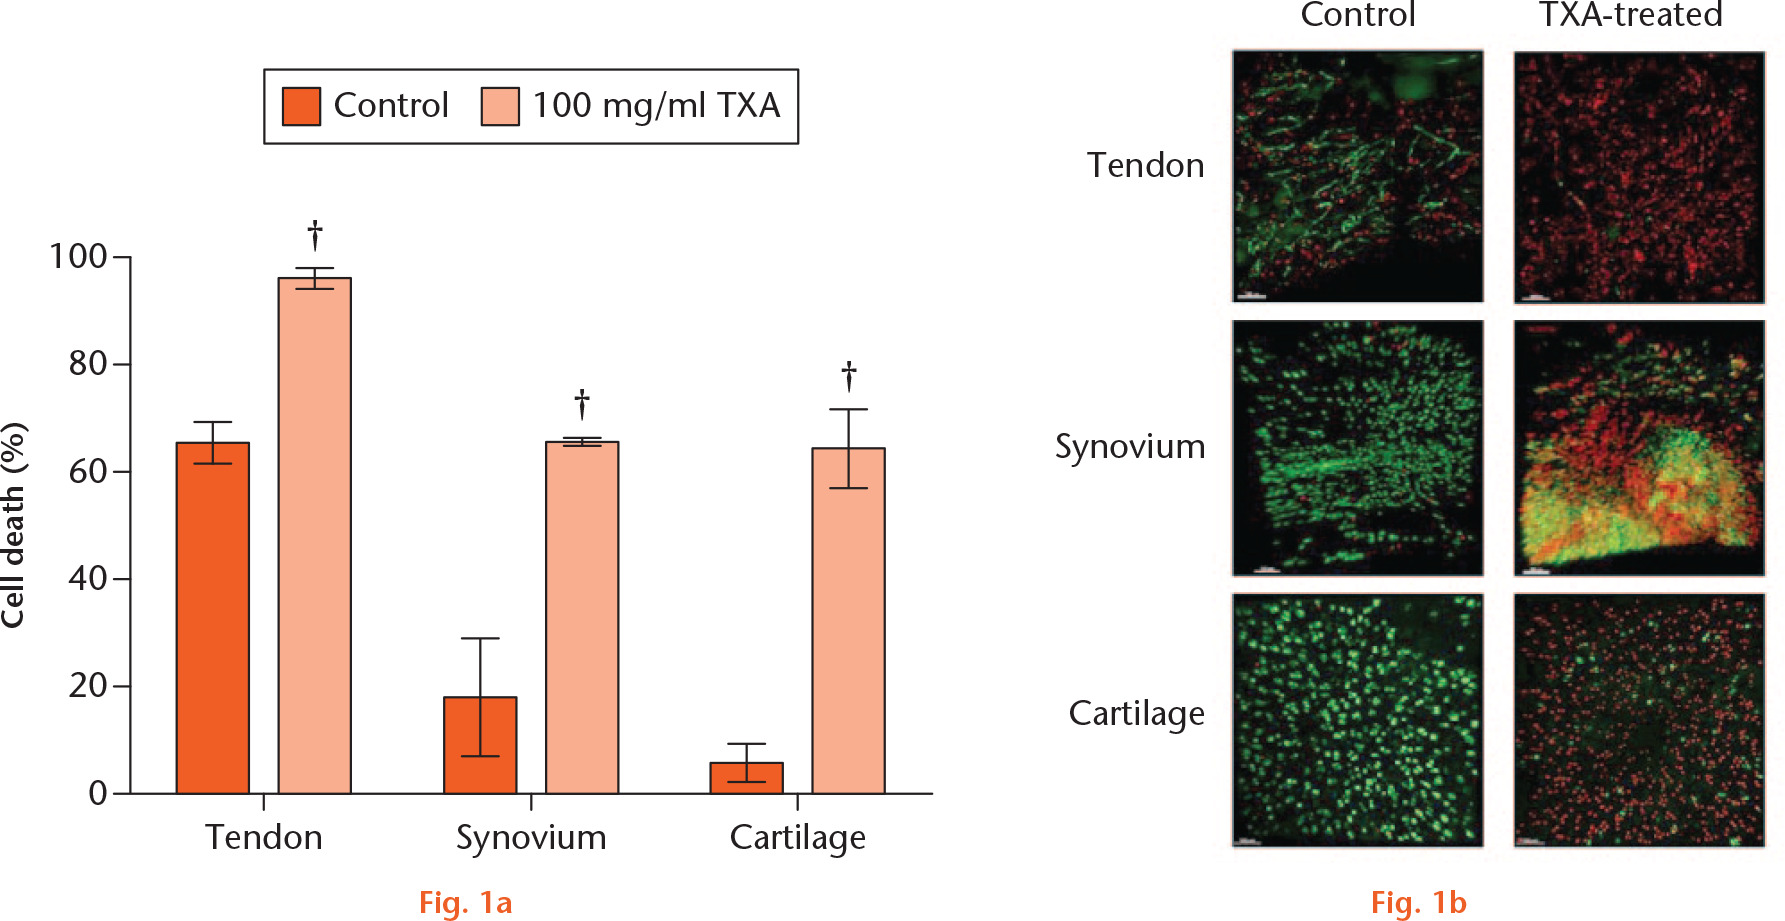  
            Tranexamic acid (TXA) toxicity in periarticular tissues ex vivo. a) Percentage of dead cells in control (0 mg/ml) and TXA-treated (100 mg/ml) cells in each periarticular tissue (n = 3 tendon, synovium; n = 4 cartilage) after 16 hours of treatment. Mean ± standard error of the mean; Student’s paired t-test. †p < 0.01. b) Tendon, synovium, ligament, and cartilage tissue imaged by confocal microscopy with 5-chloromethylfluorescein diacetate (CMFDA) and propidium iodide (PI) stain at 16 hours of treatment in control and TXA-treated (100 mg/ml TXA cells). Green stained cells counted as live and red stained cells counted as dead.
          